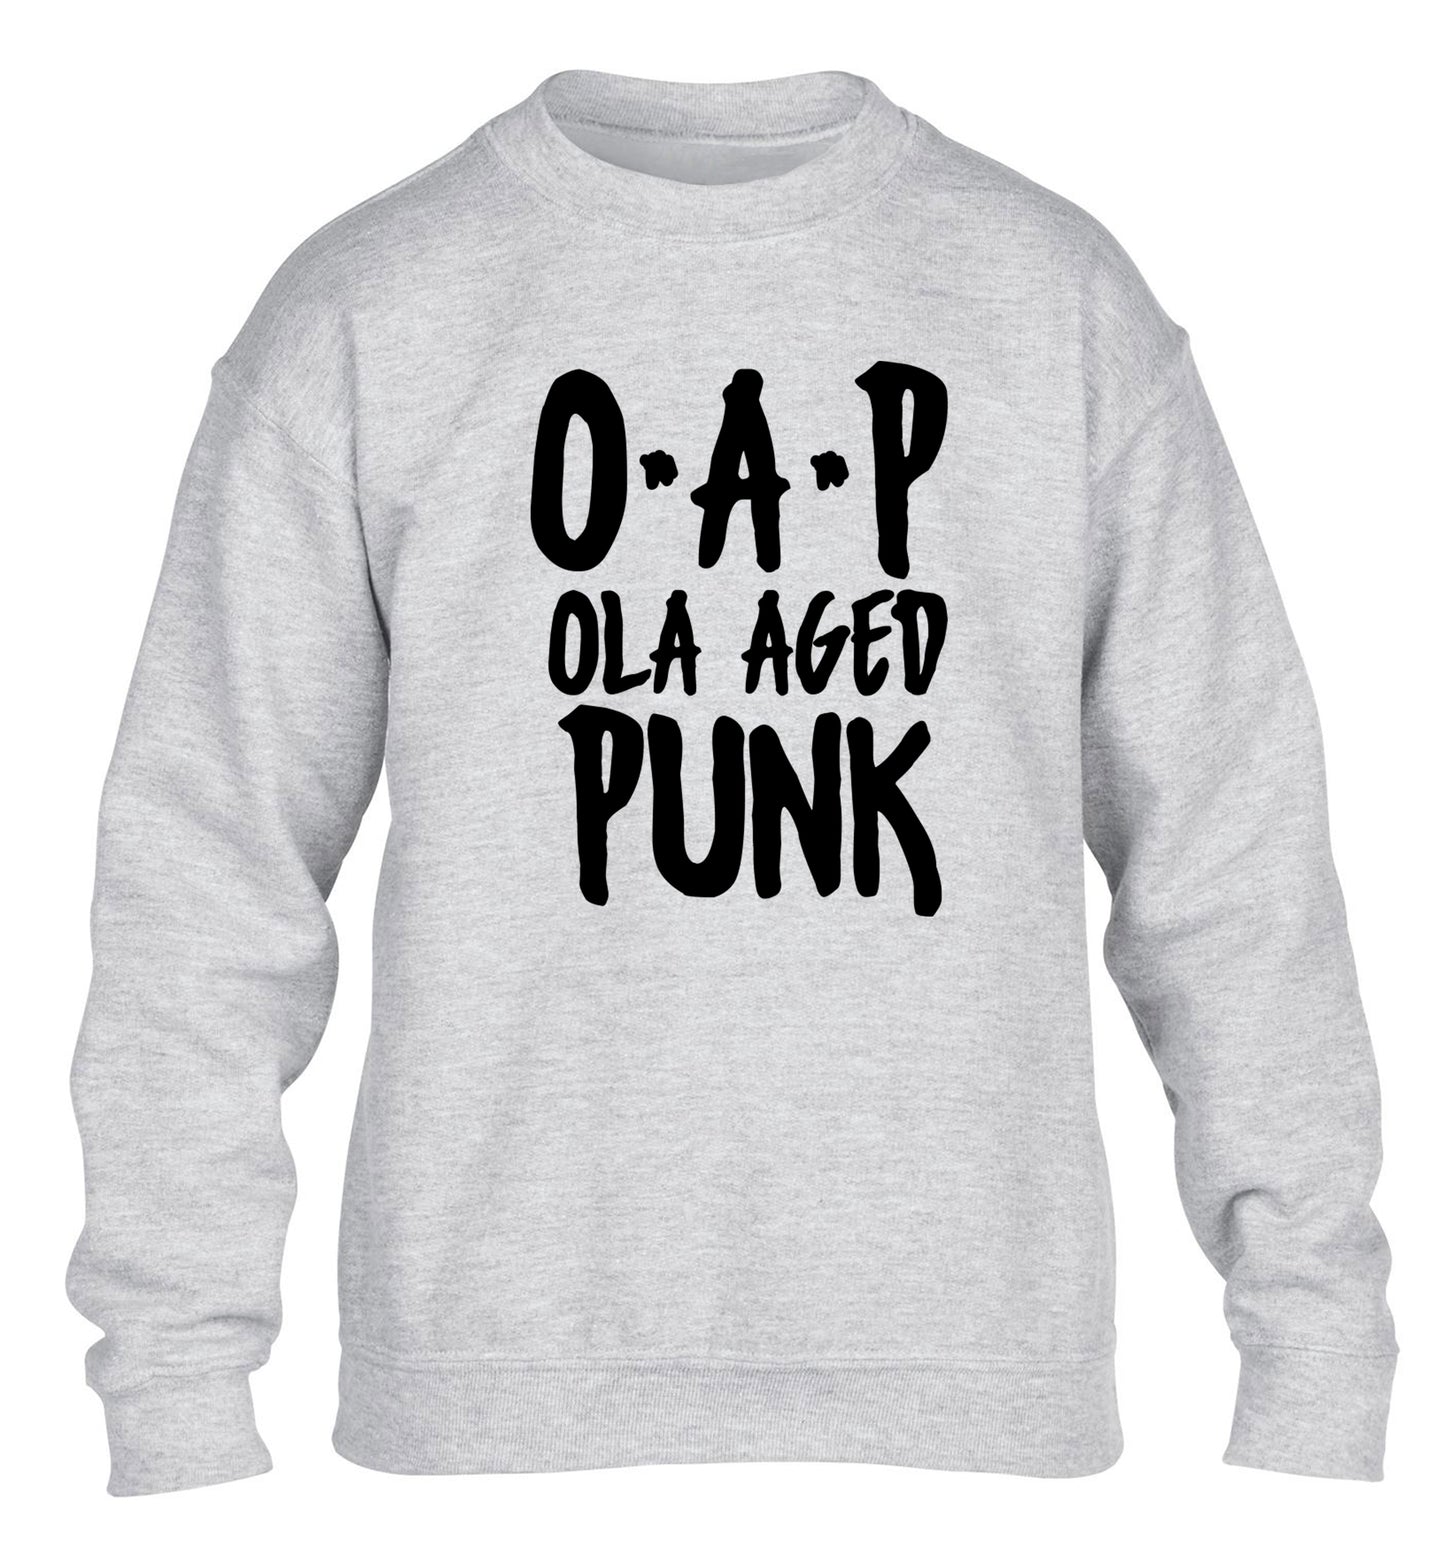 O.A.P Old Aged Punk children's grey sweater 12-13 Years